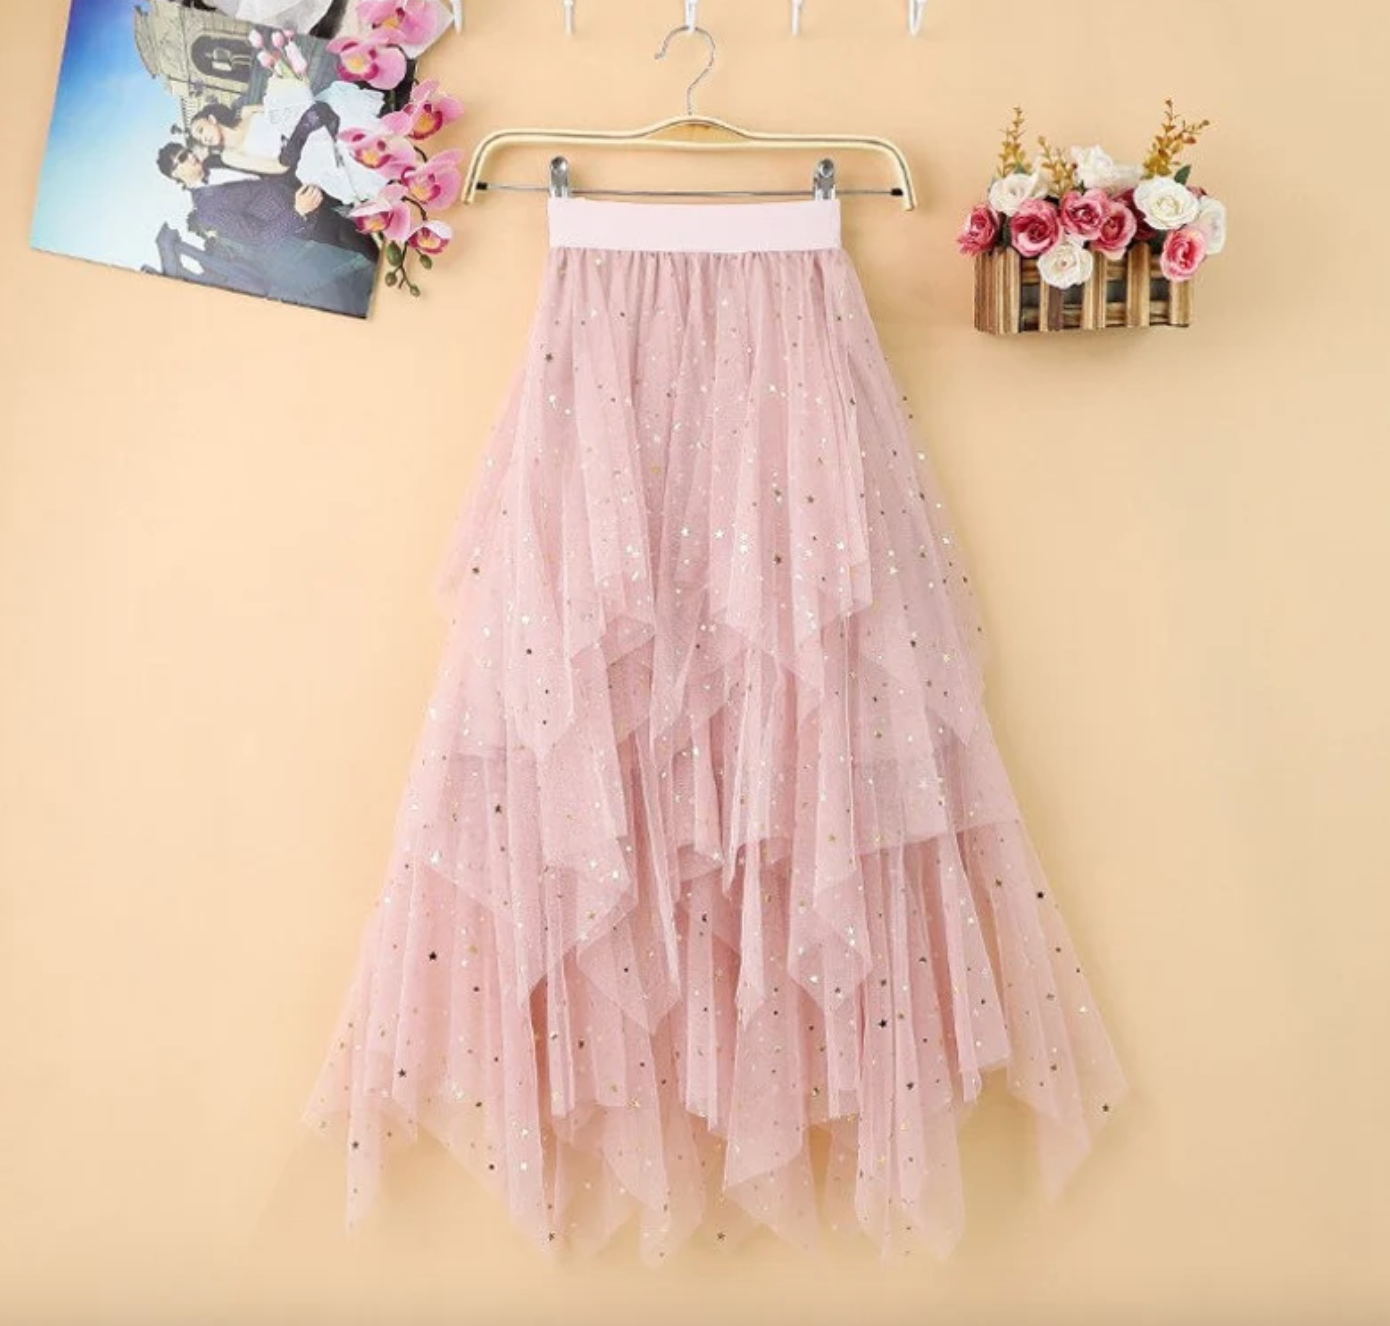 Layered pink tulle skirt with glitter hanging on wall next to photo and flowers